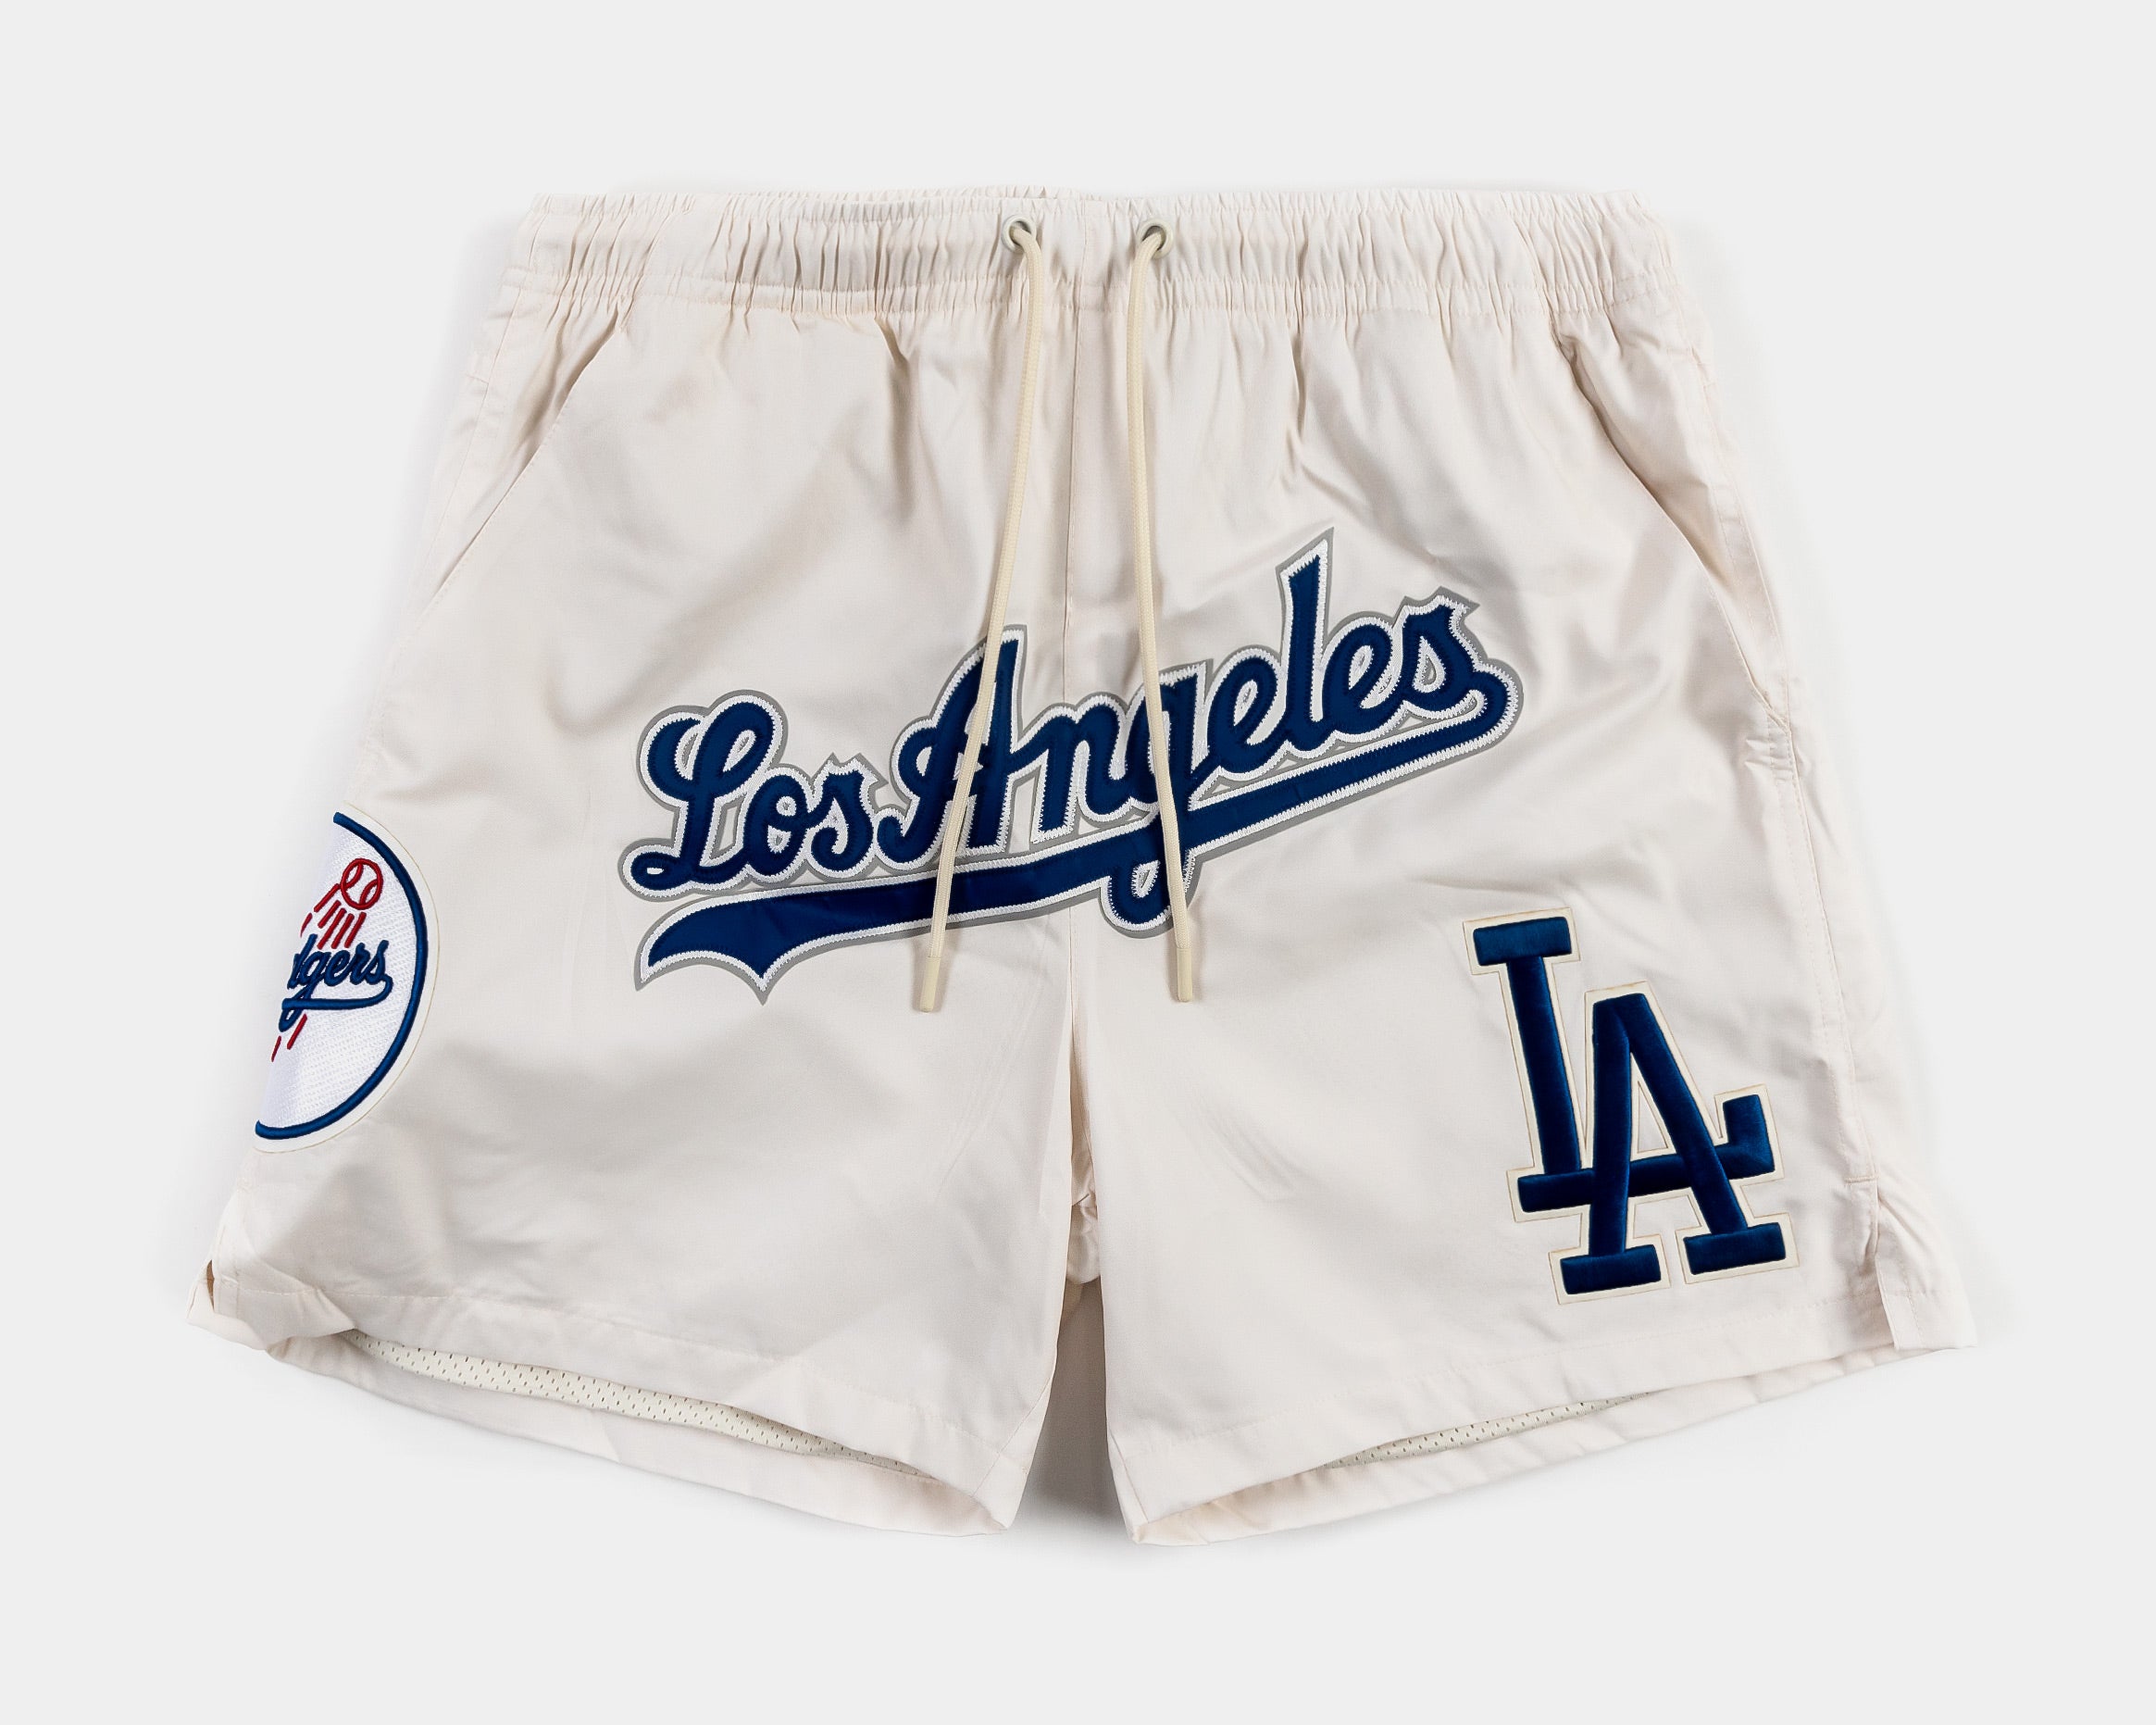 Men's Los Angeles Dodgers Mexico Cool Base Jersey - All Stitched